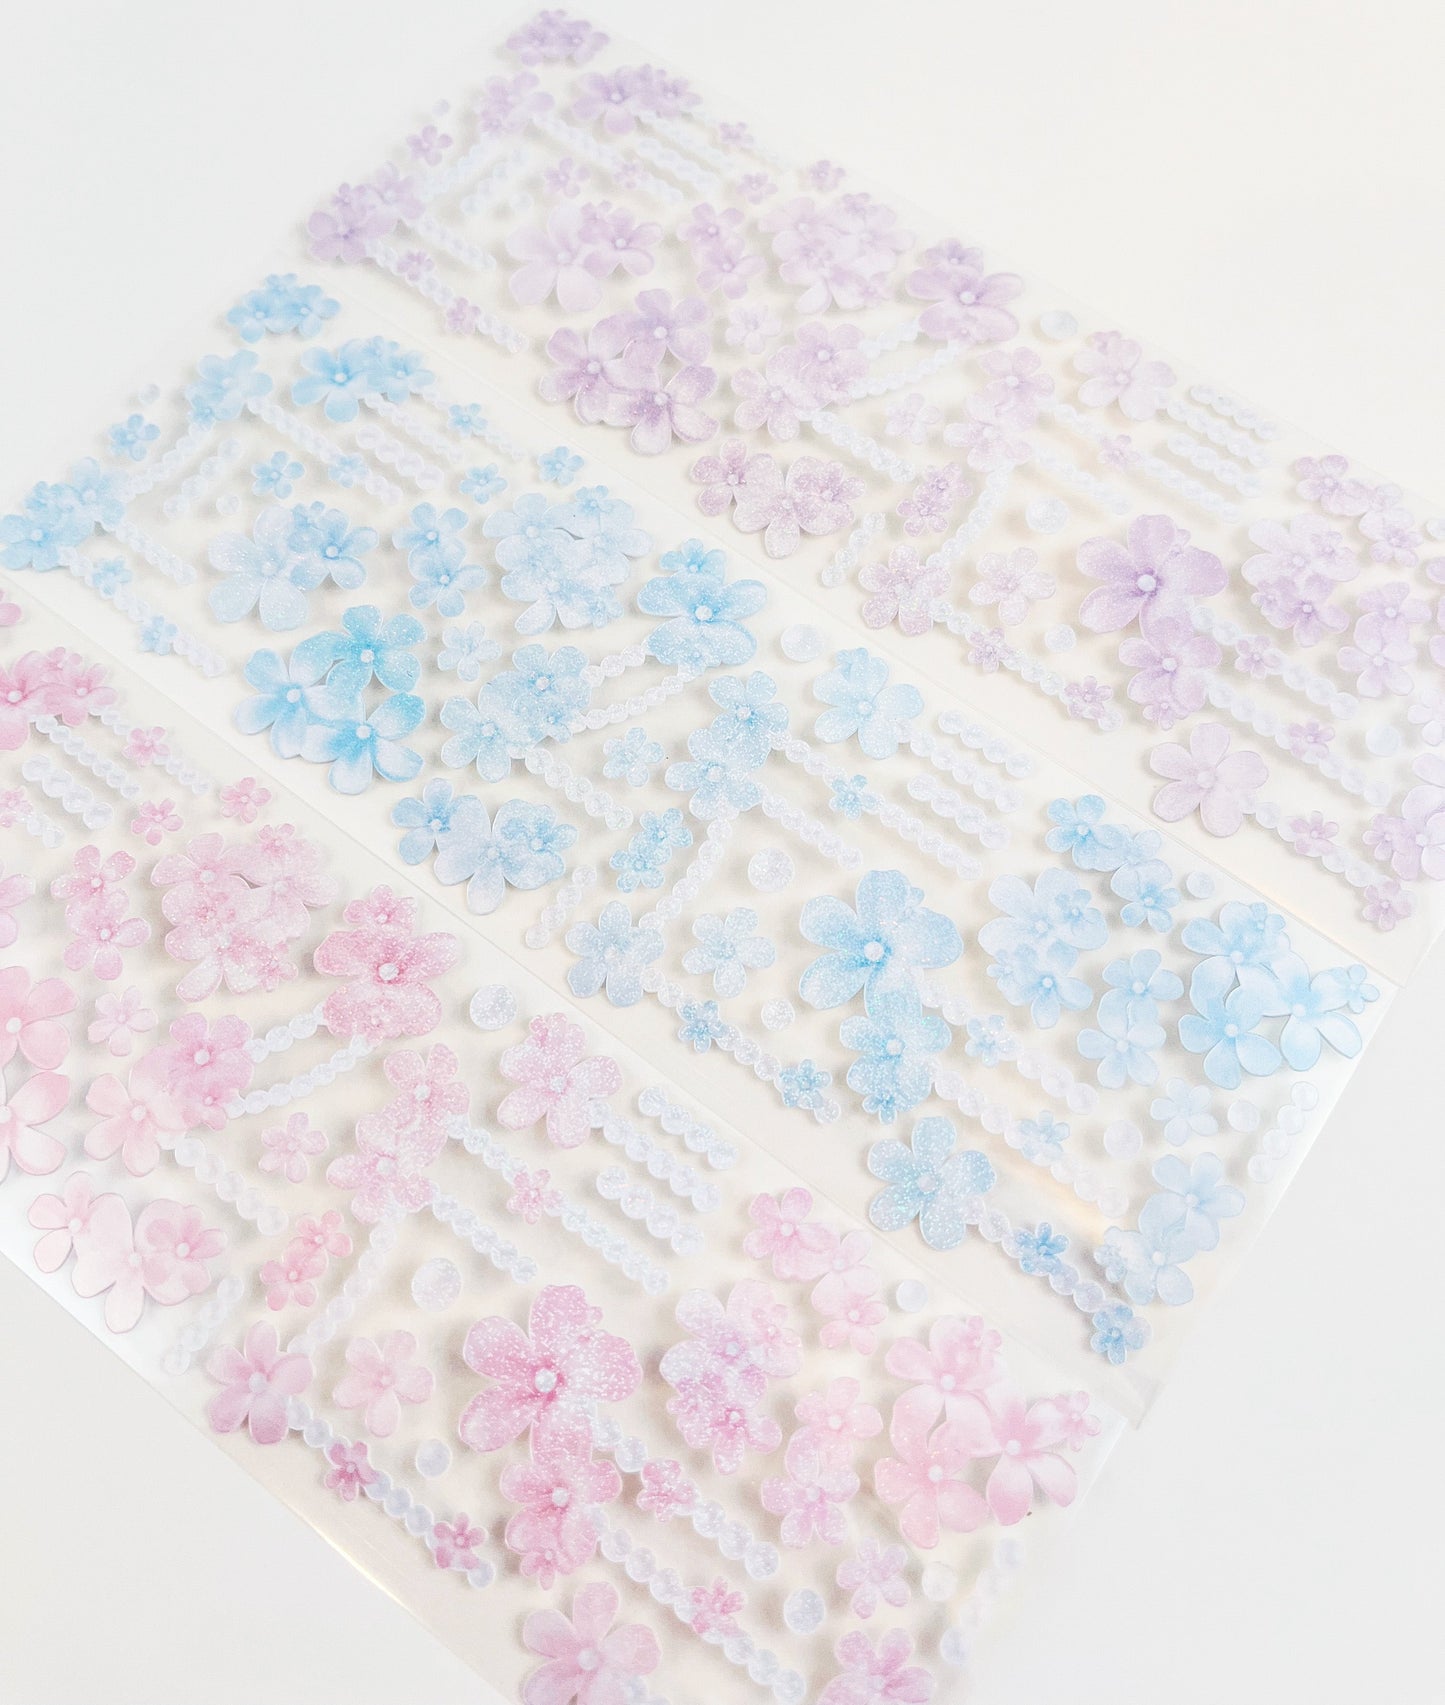 [borahstudio] Pearly Forget Me Nots (Daylight) : Forget Me Not Collection